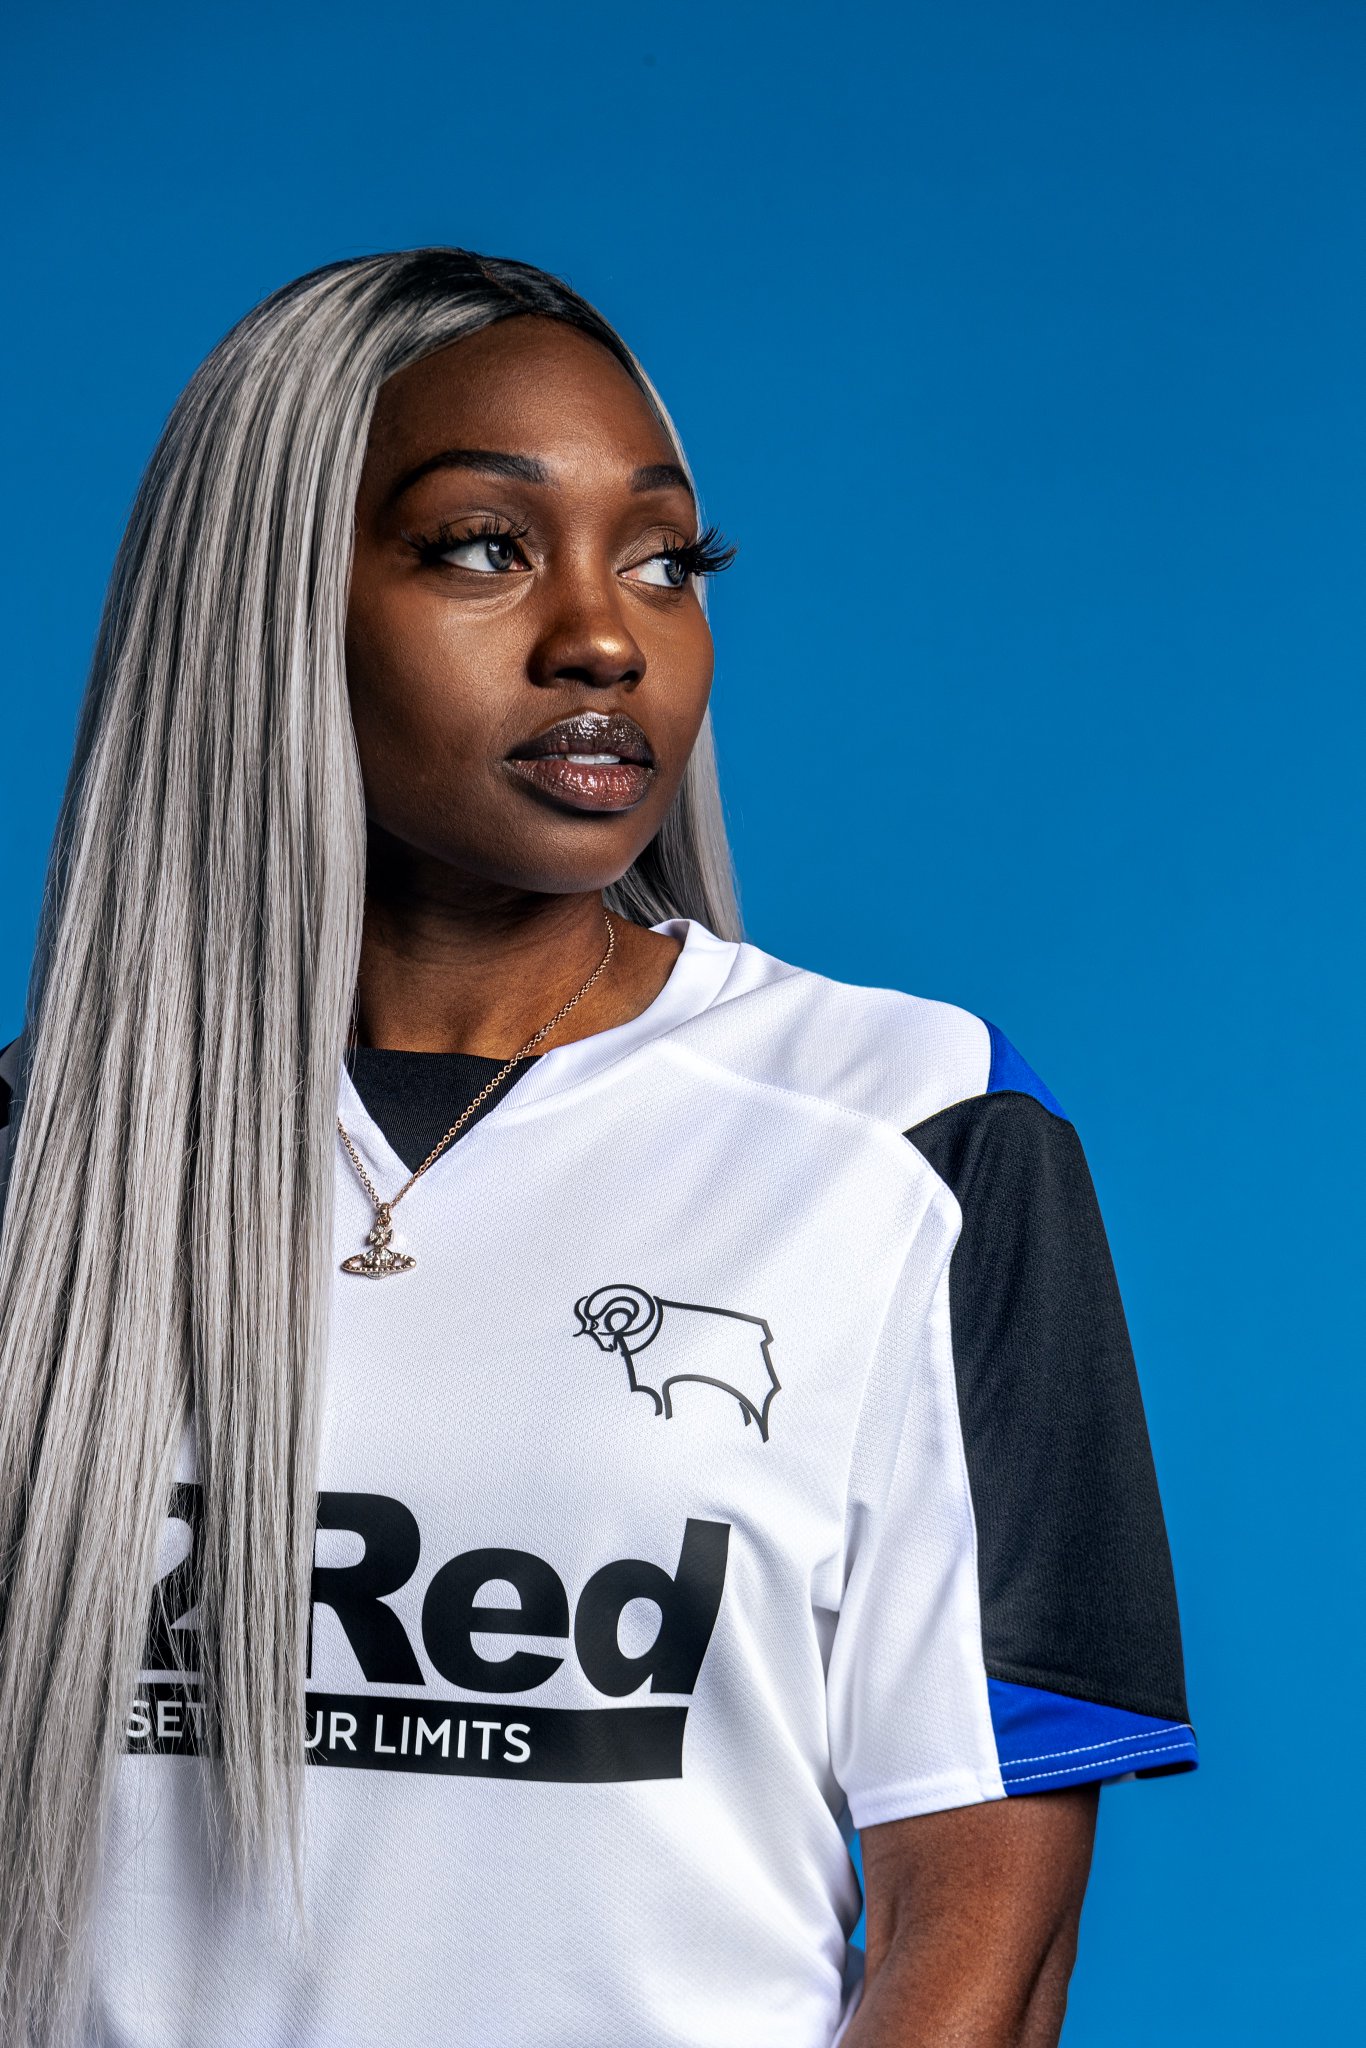 Derby County thuisshirt 2021-2022